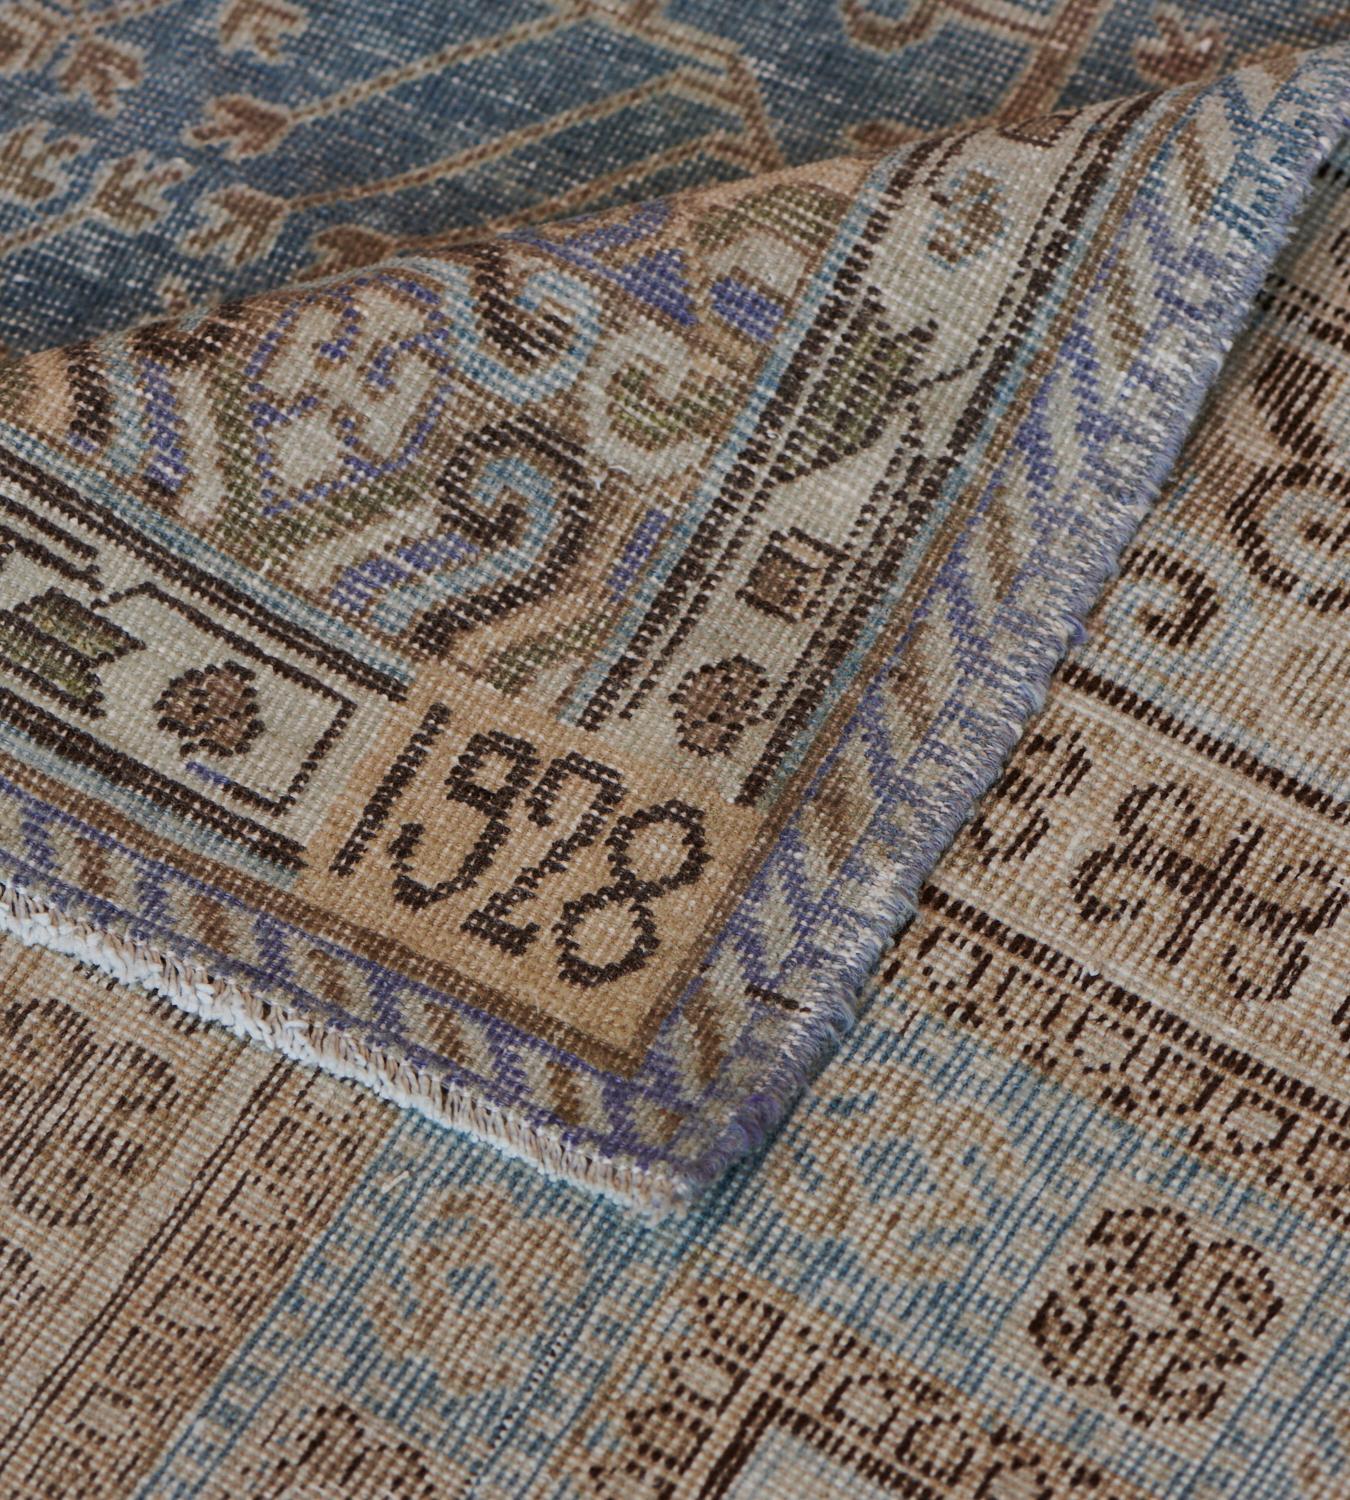 Early 20th Century Antique Handwoven Khotan Rug, Dated 1928 For Sale